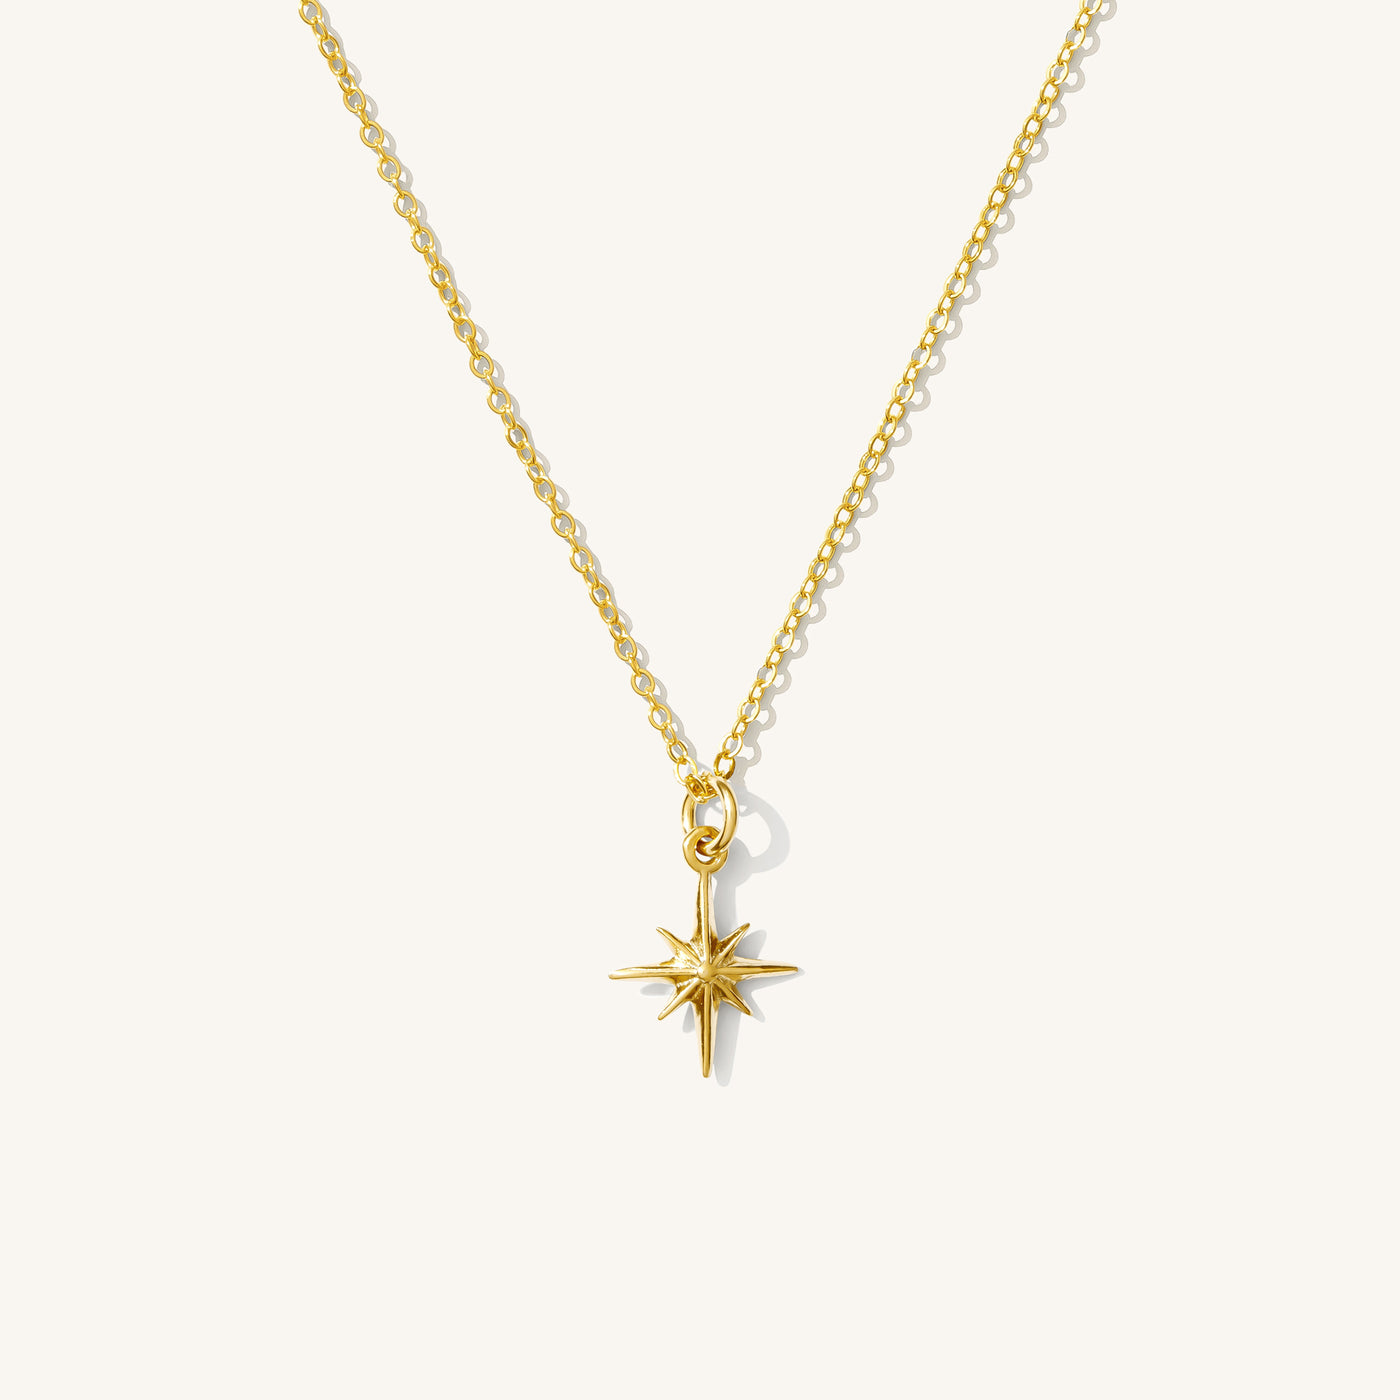 North Star Necklace | Simple & Dainty Jewelry